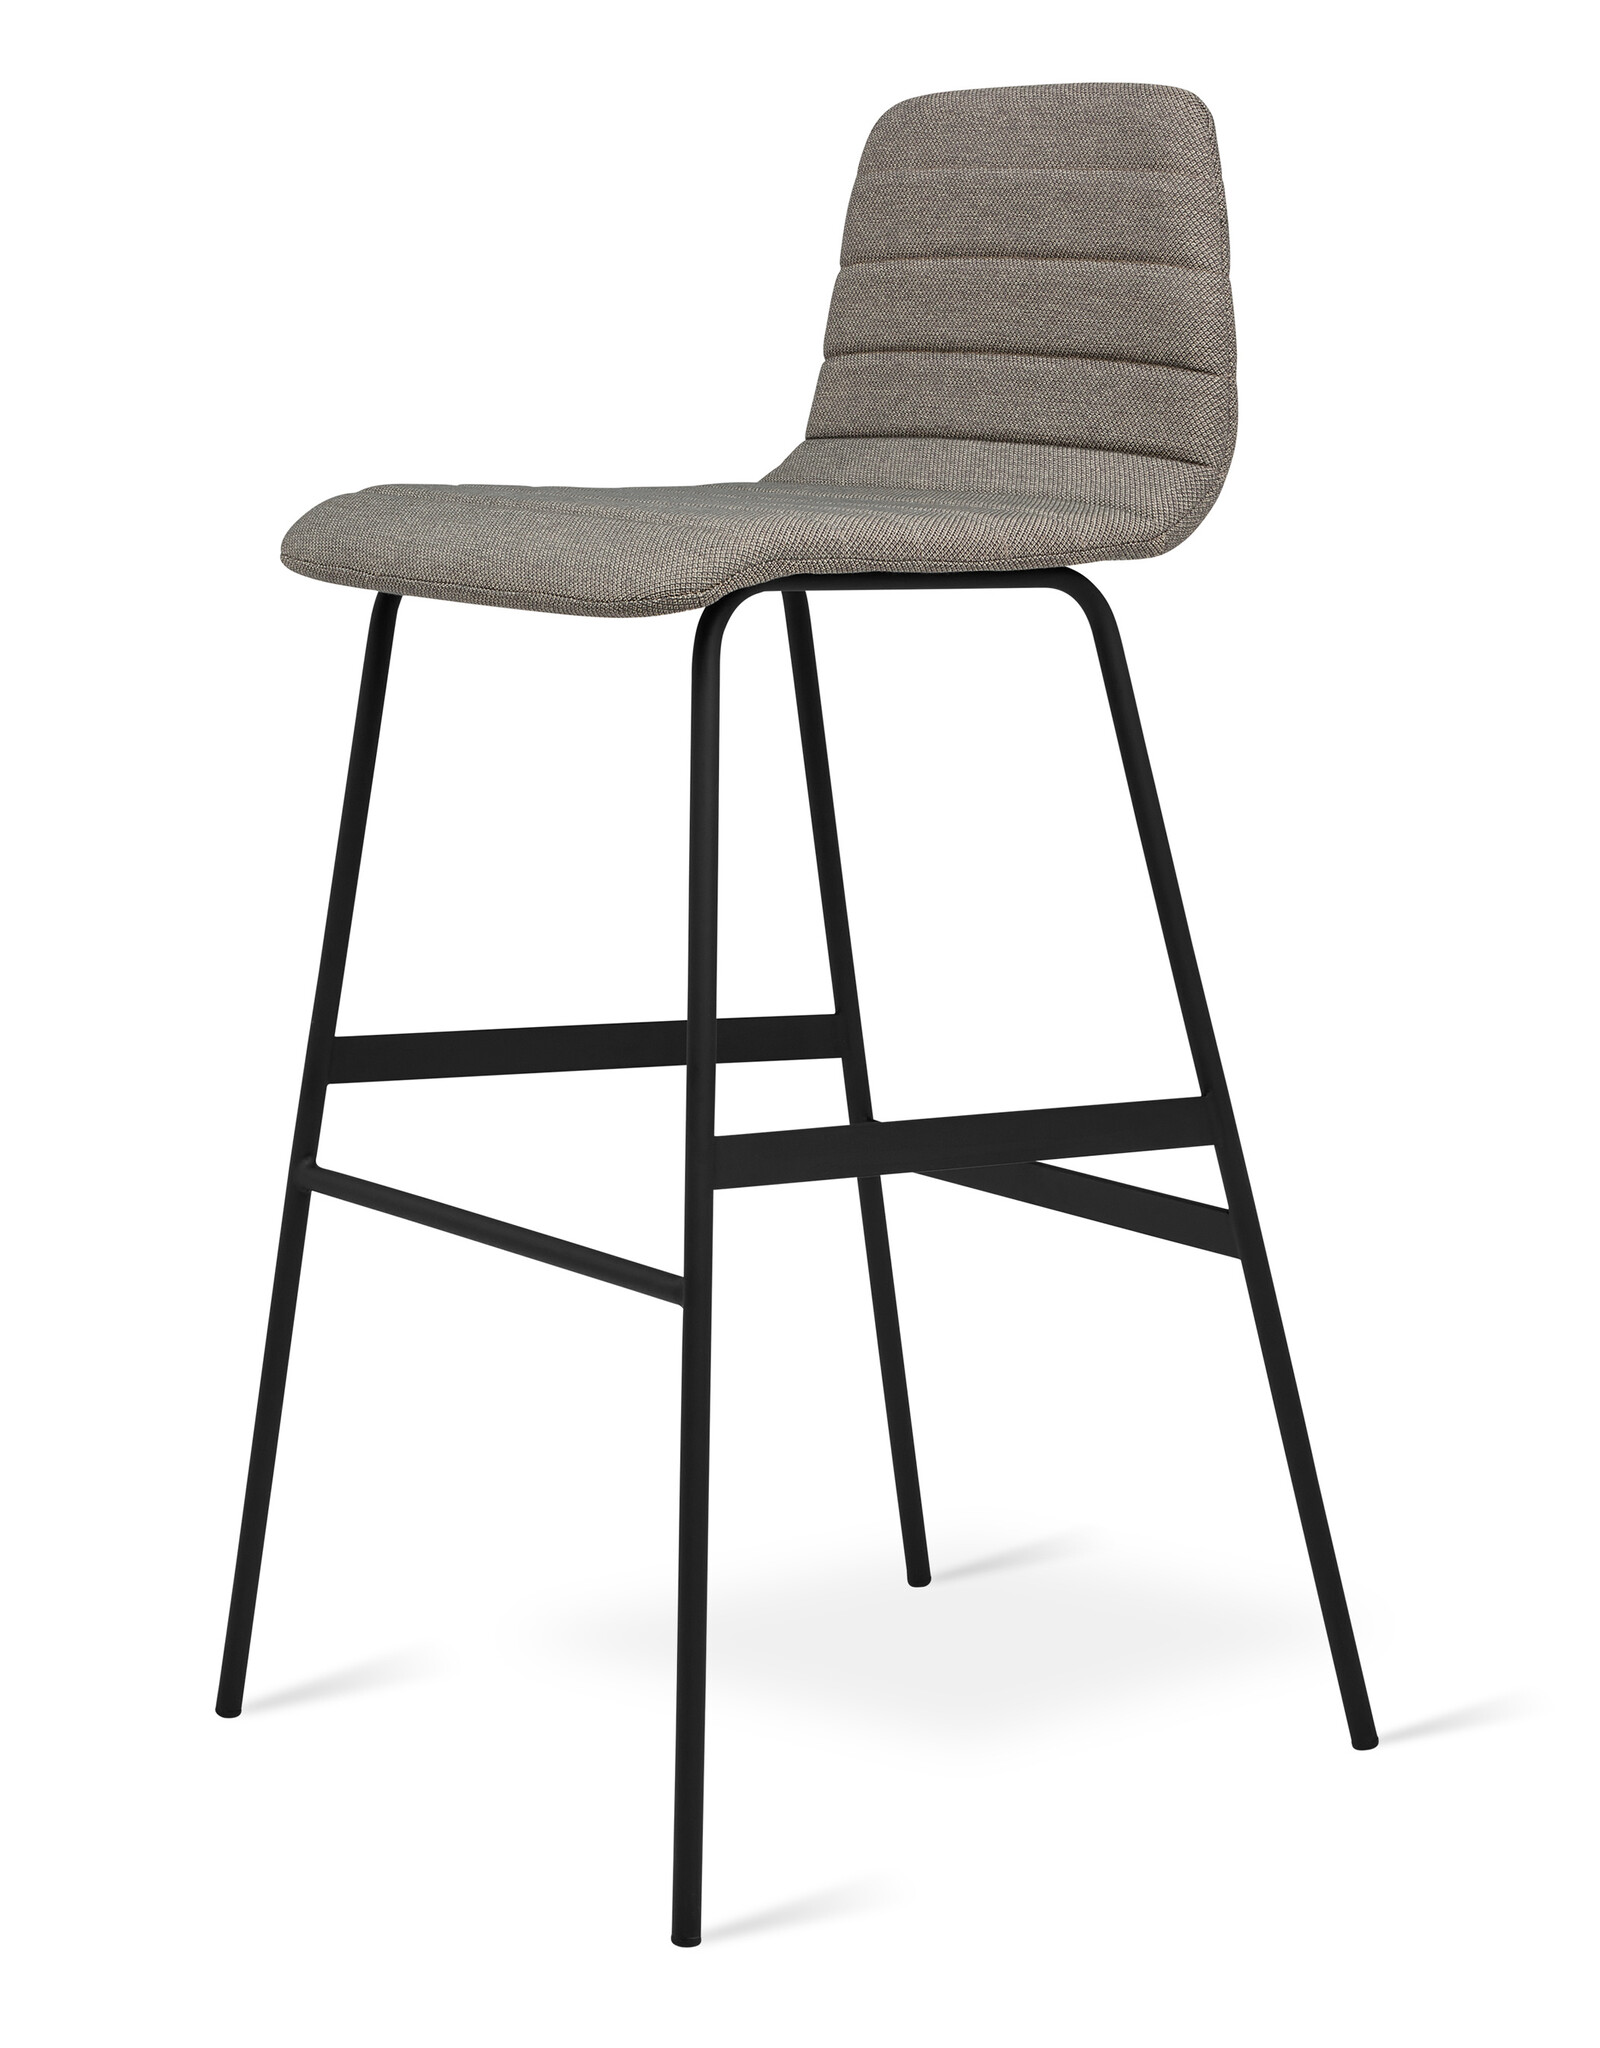 Gus* Modern Lecture Upholstered Barstool